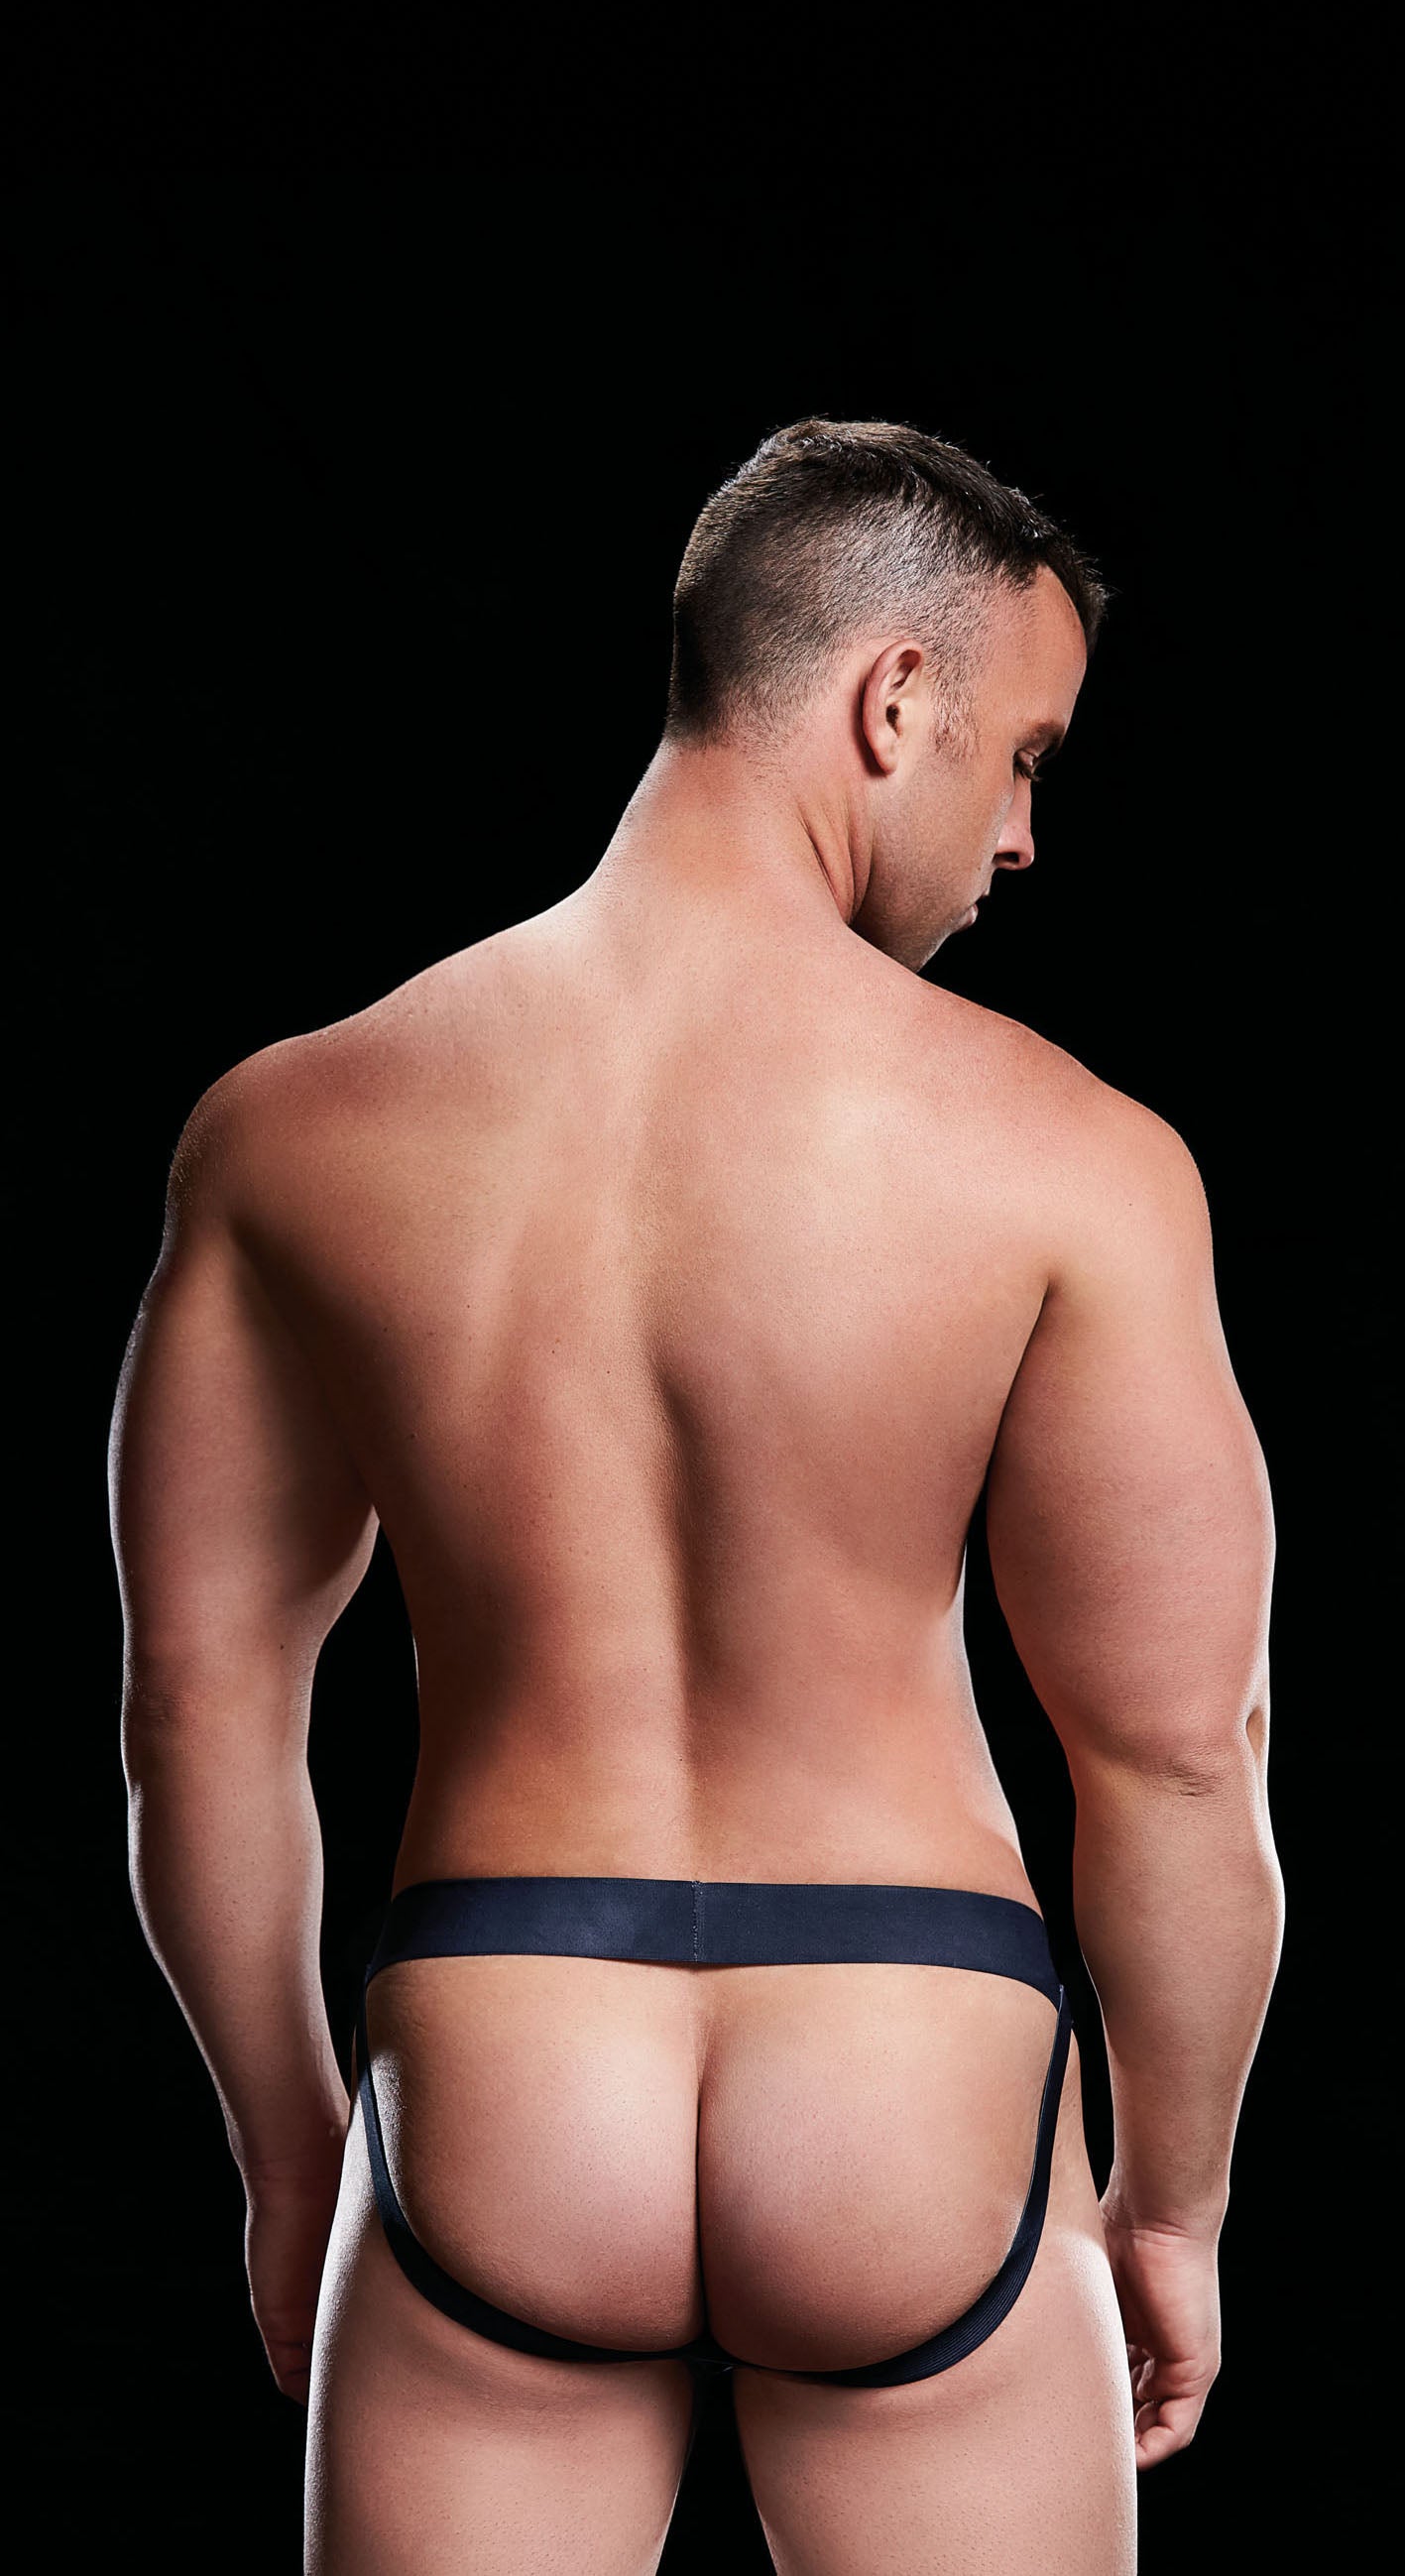 Low Rise Jock Navy - Just for you desires